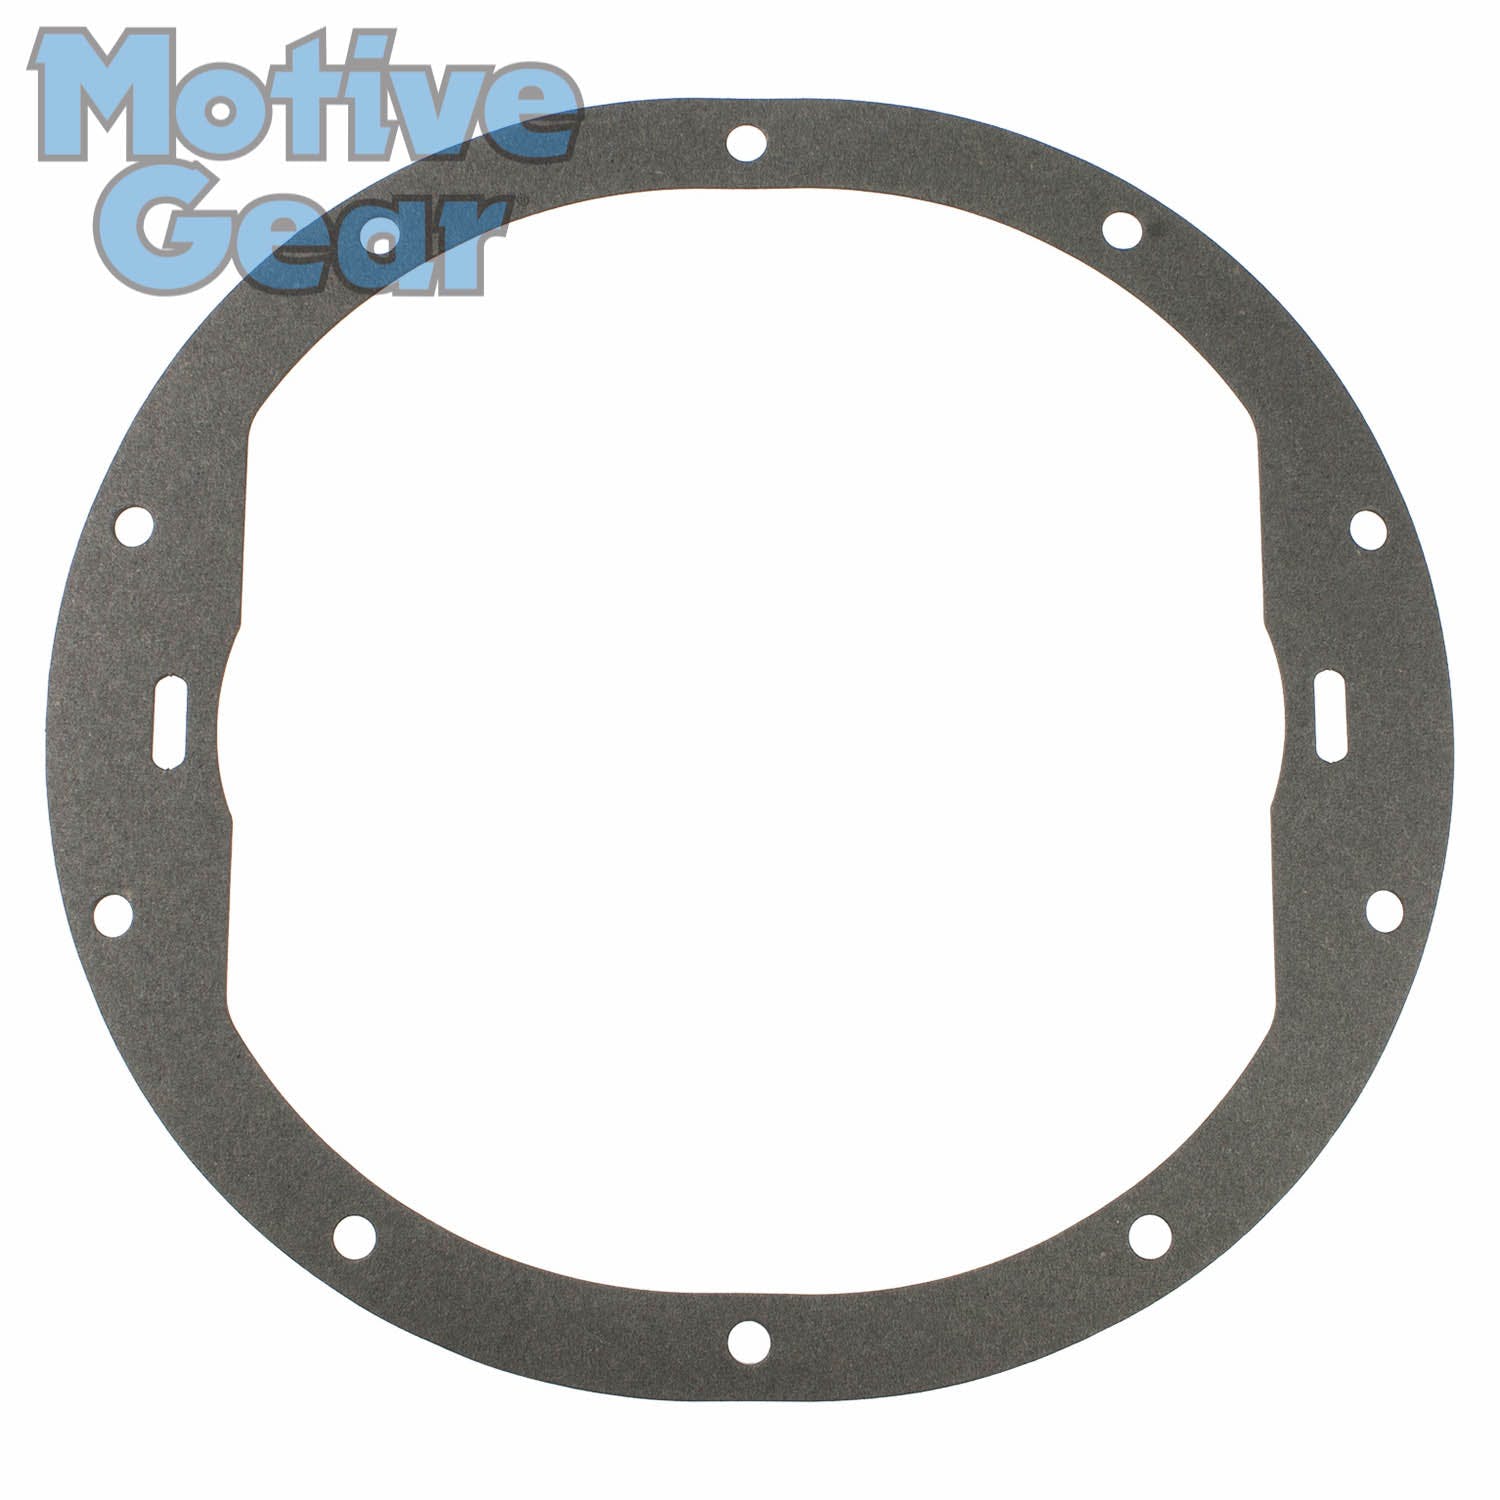 Motive Gear 3993593 Differential Cover Gasket